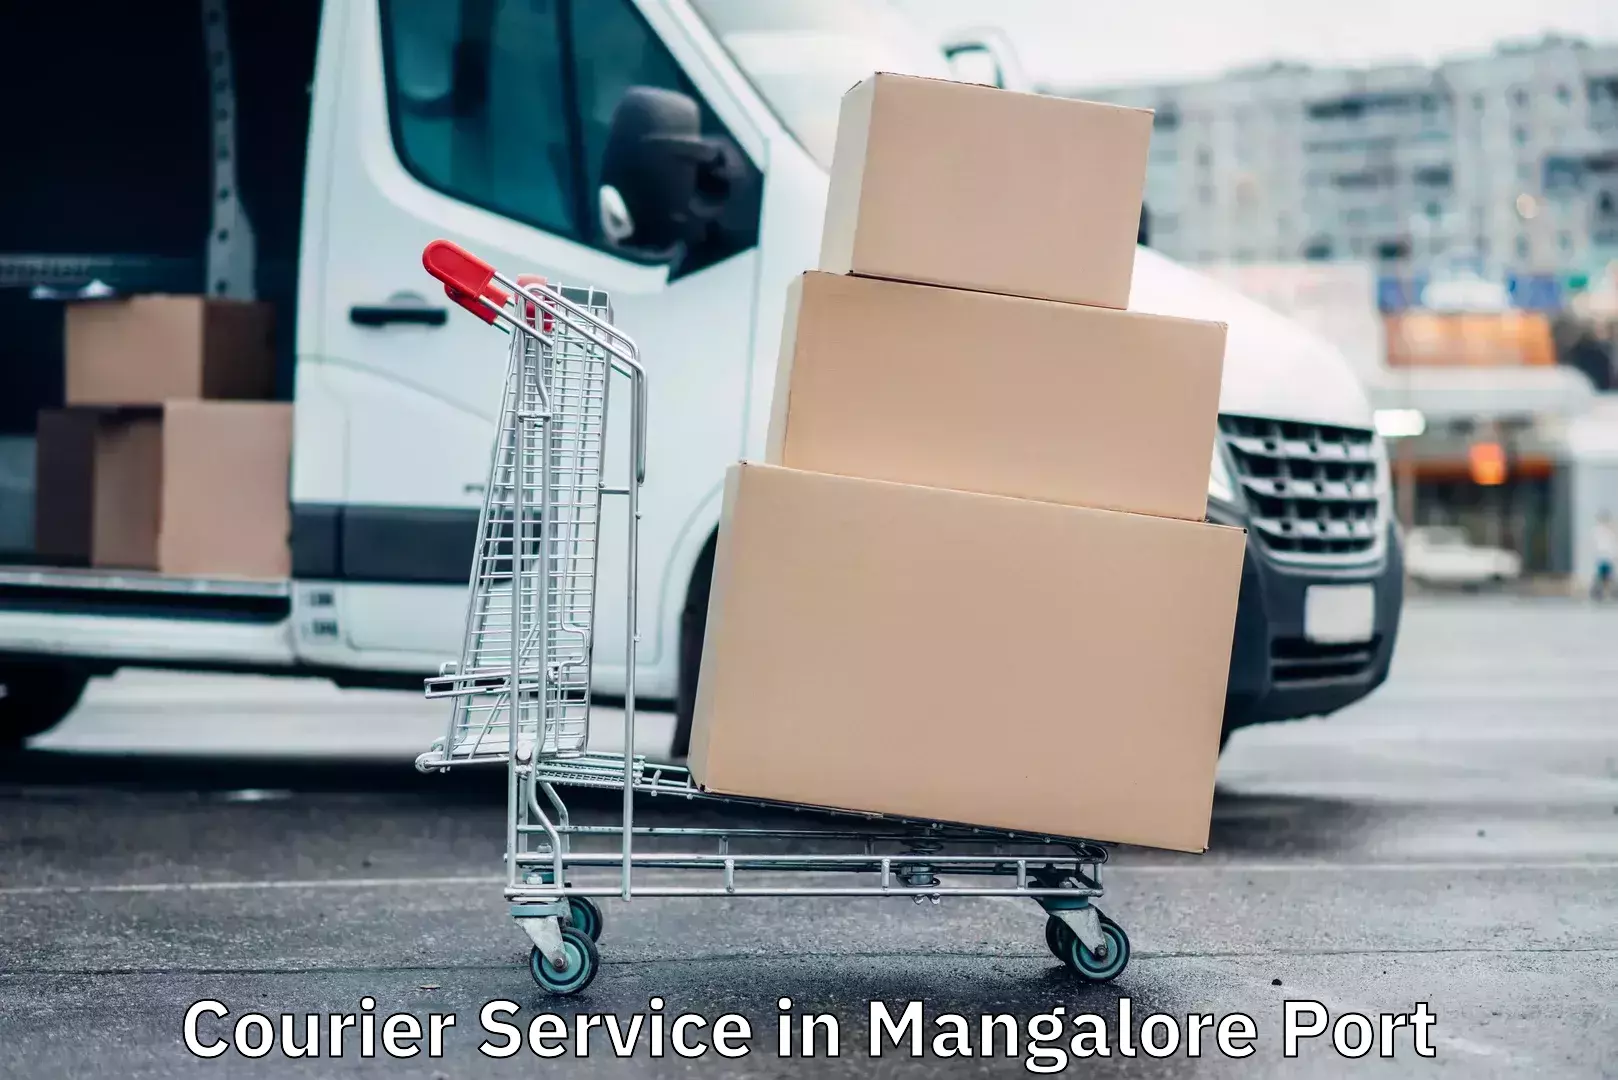 Cargo courier service in Mangalore Port